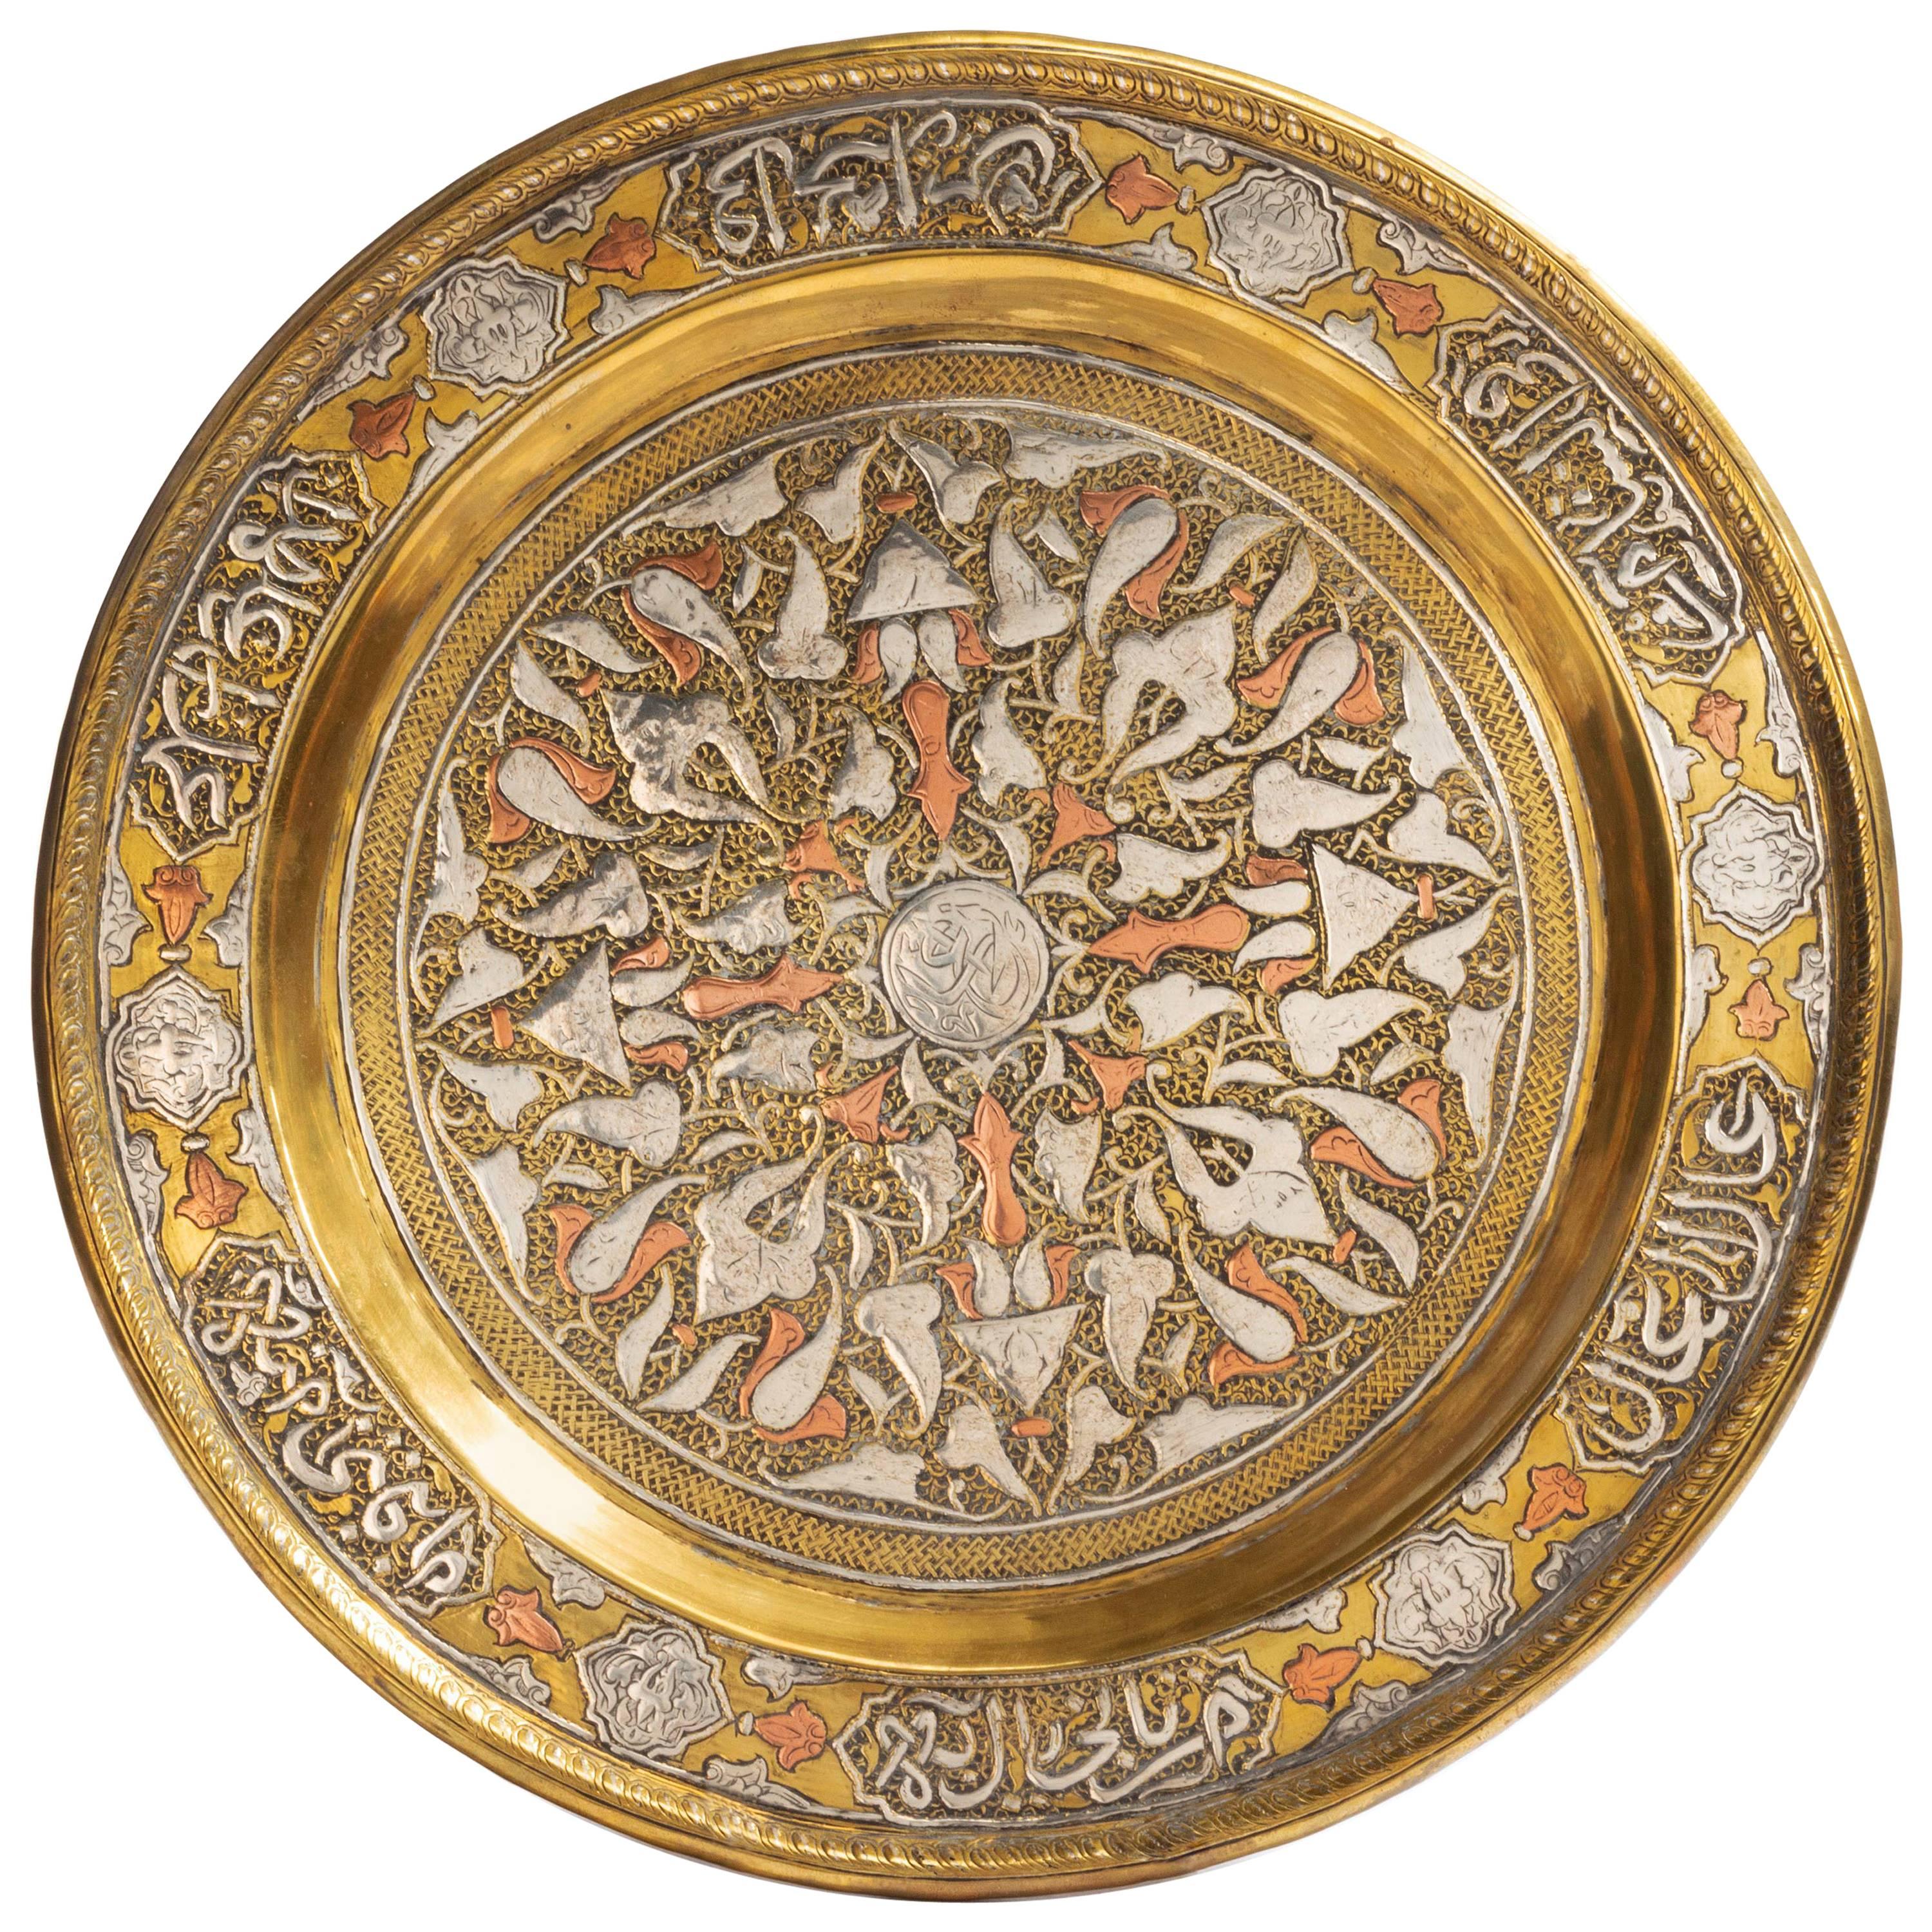 Middle-Eastern Dish with Silver Inlays